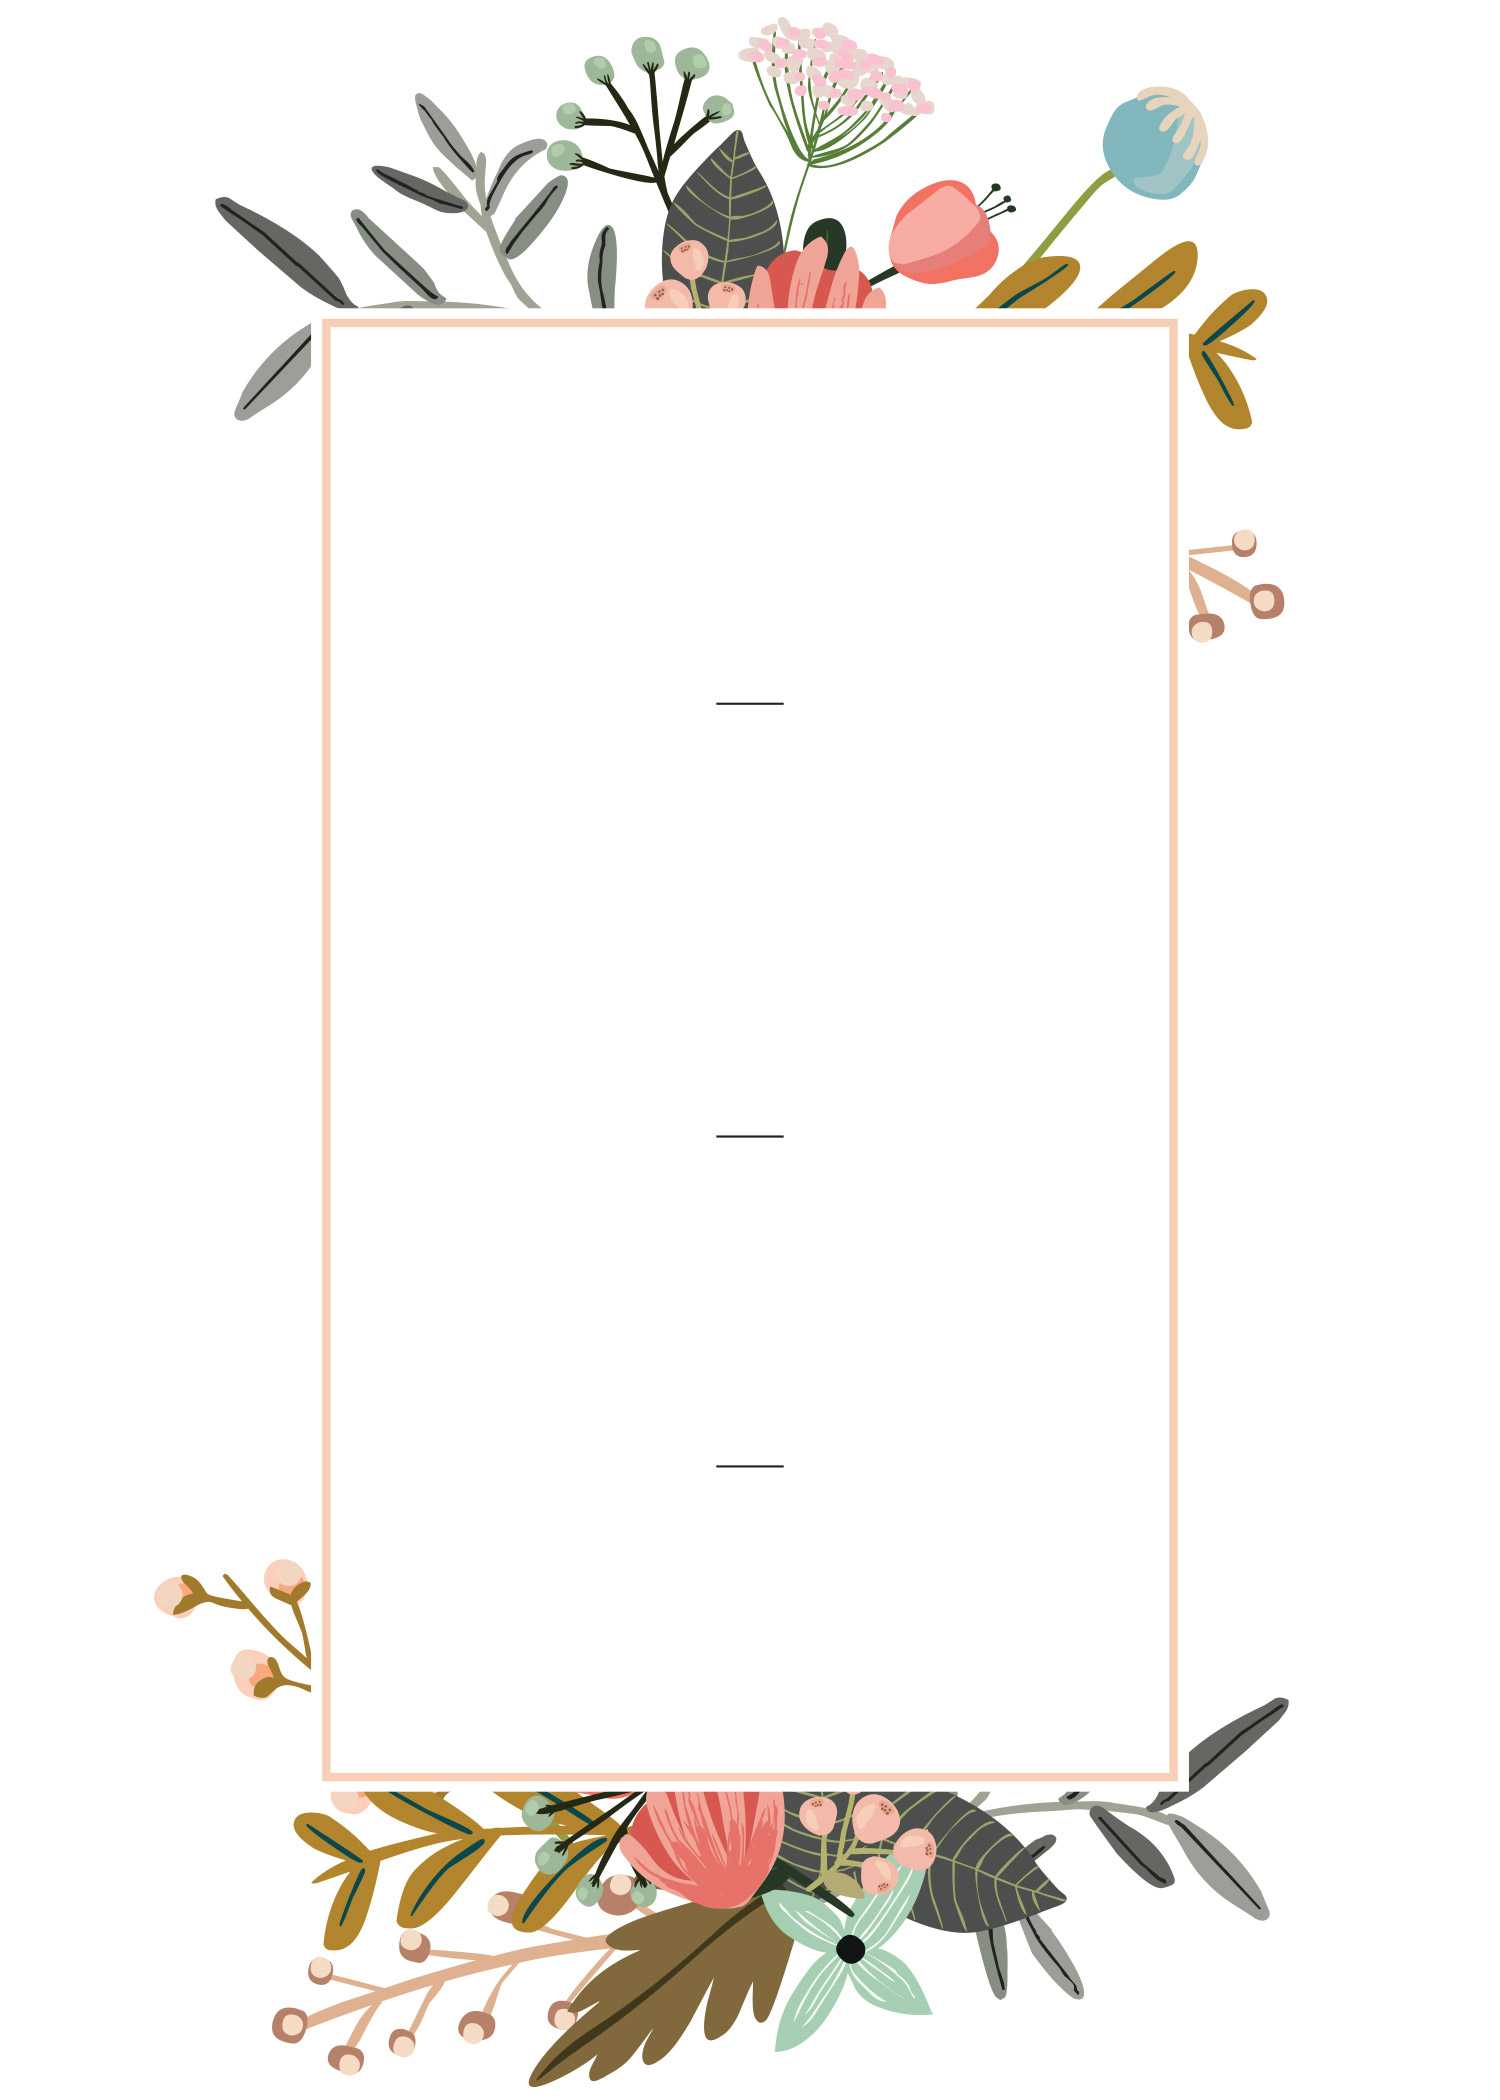 Editable Wedding Invitation Templates For The Perfect Card With Regard To Invitation Cards Templates For Marriage